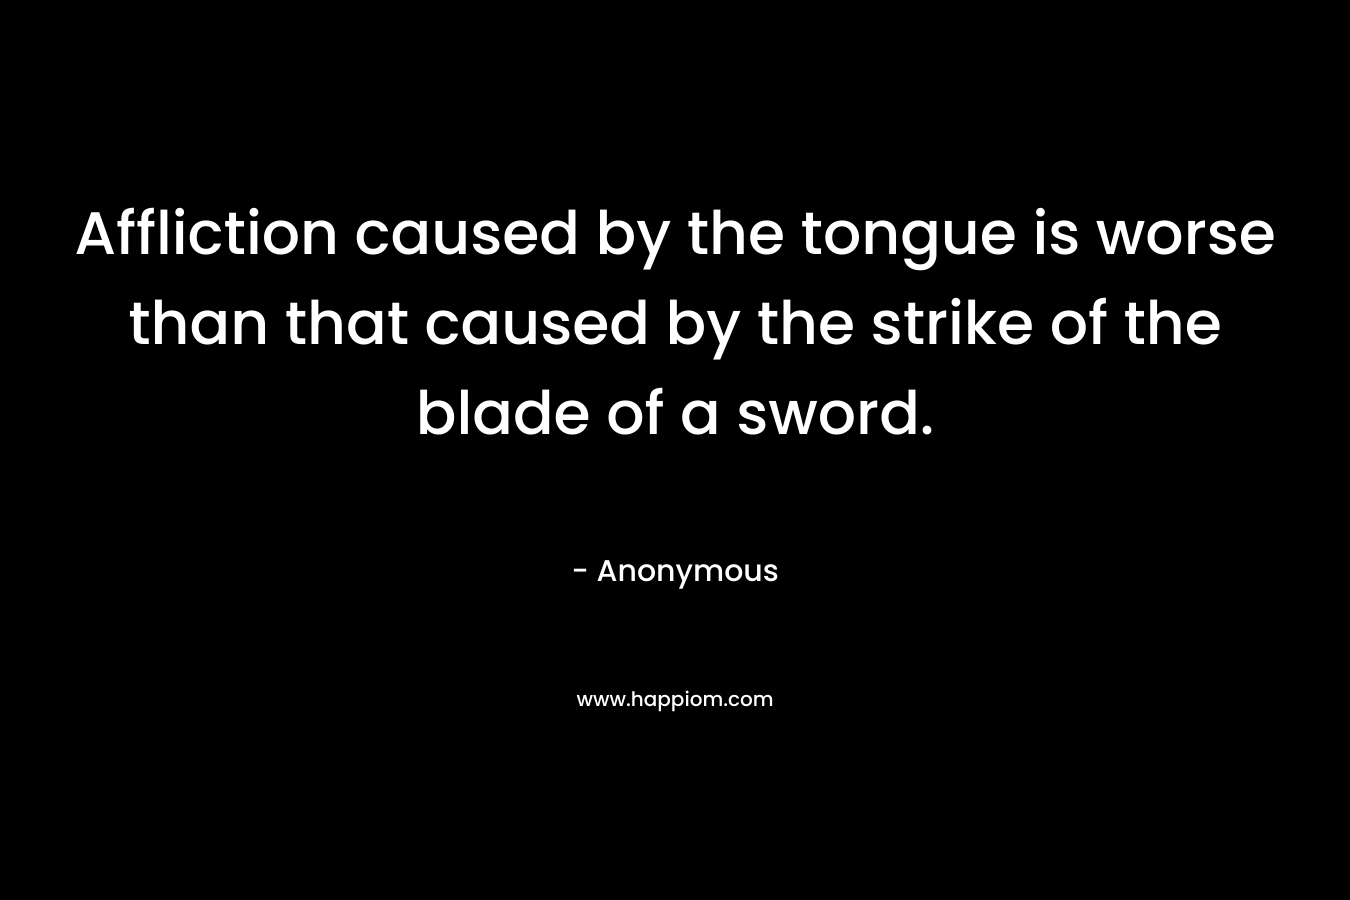 Affliction caused by the tongue is worse than that caused by the strike of the blade of a sword.